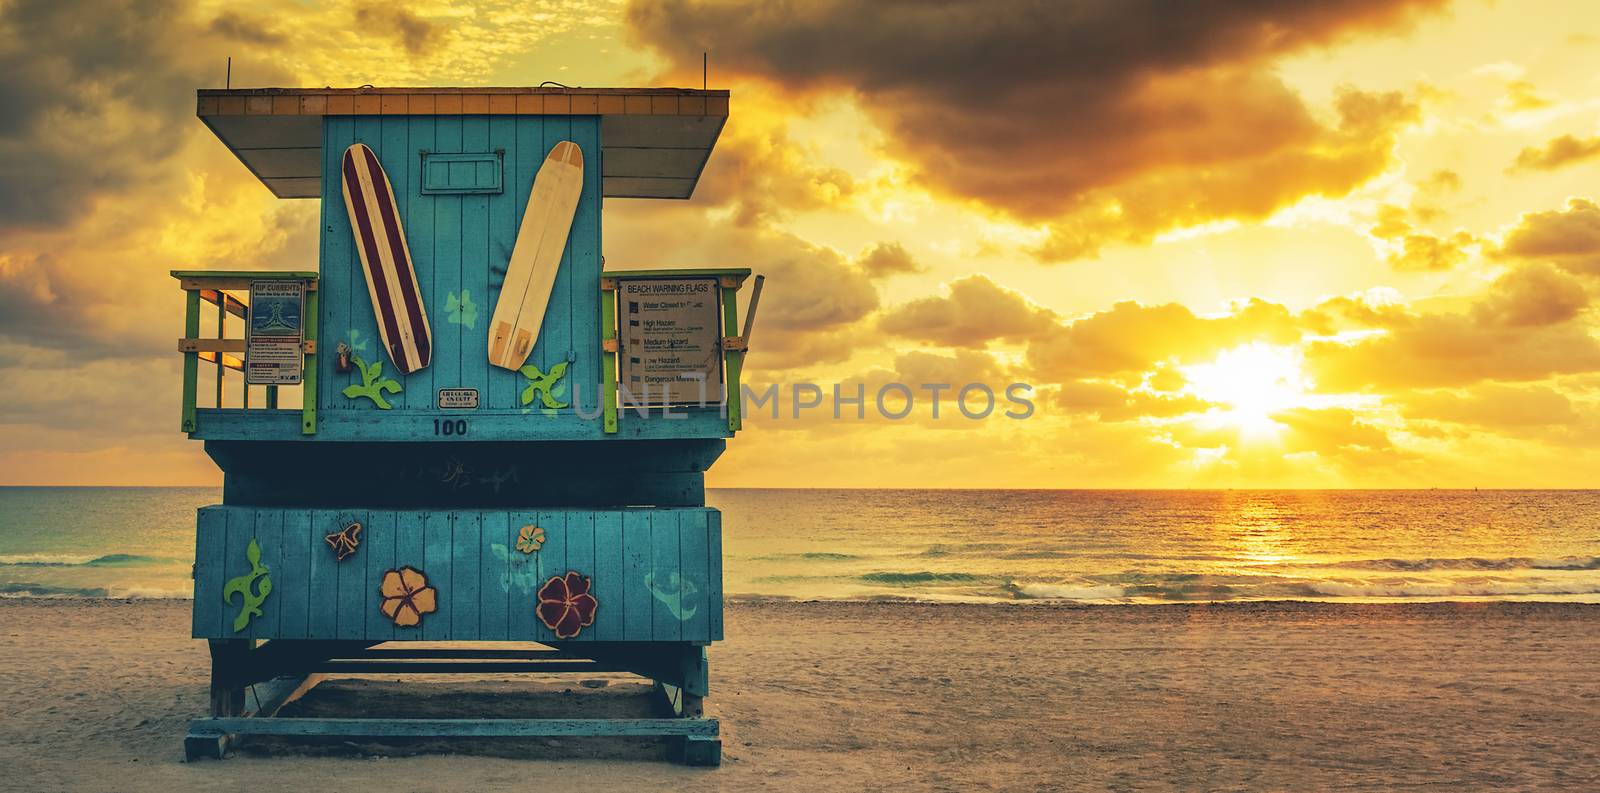 Miami South Beach sunrise with lifeguard tower by vwalakte